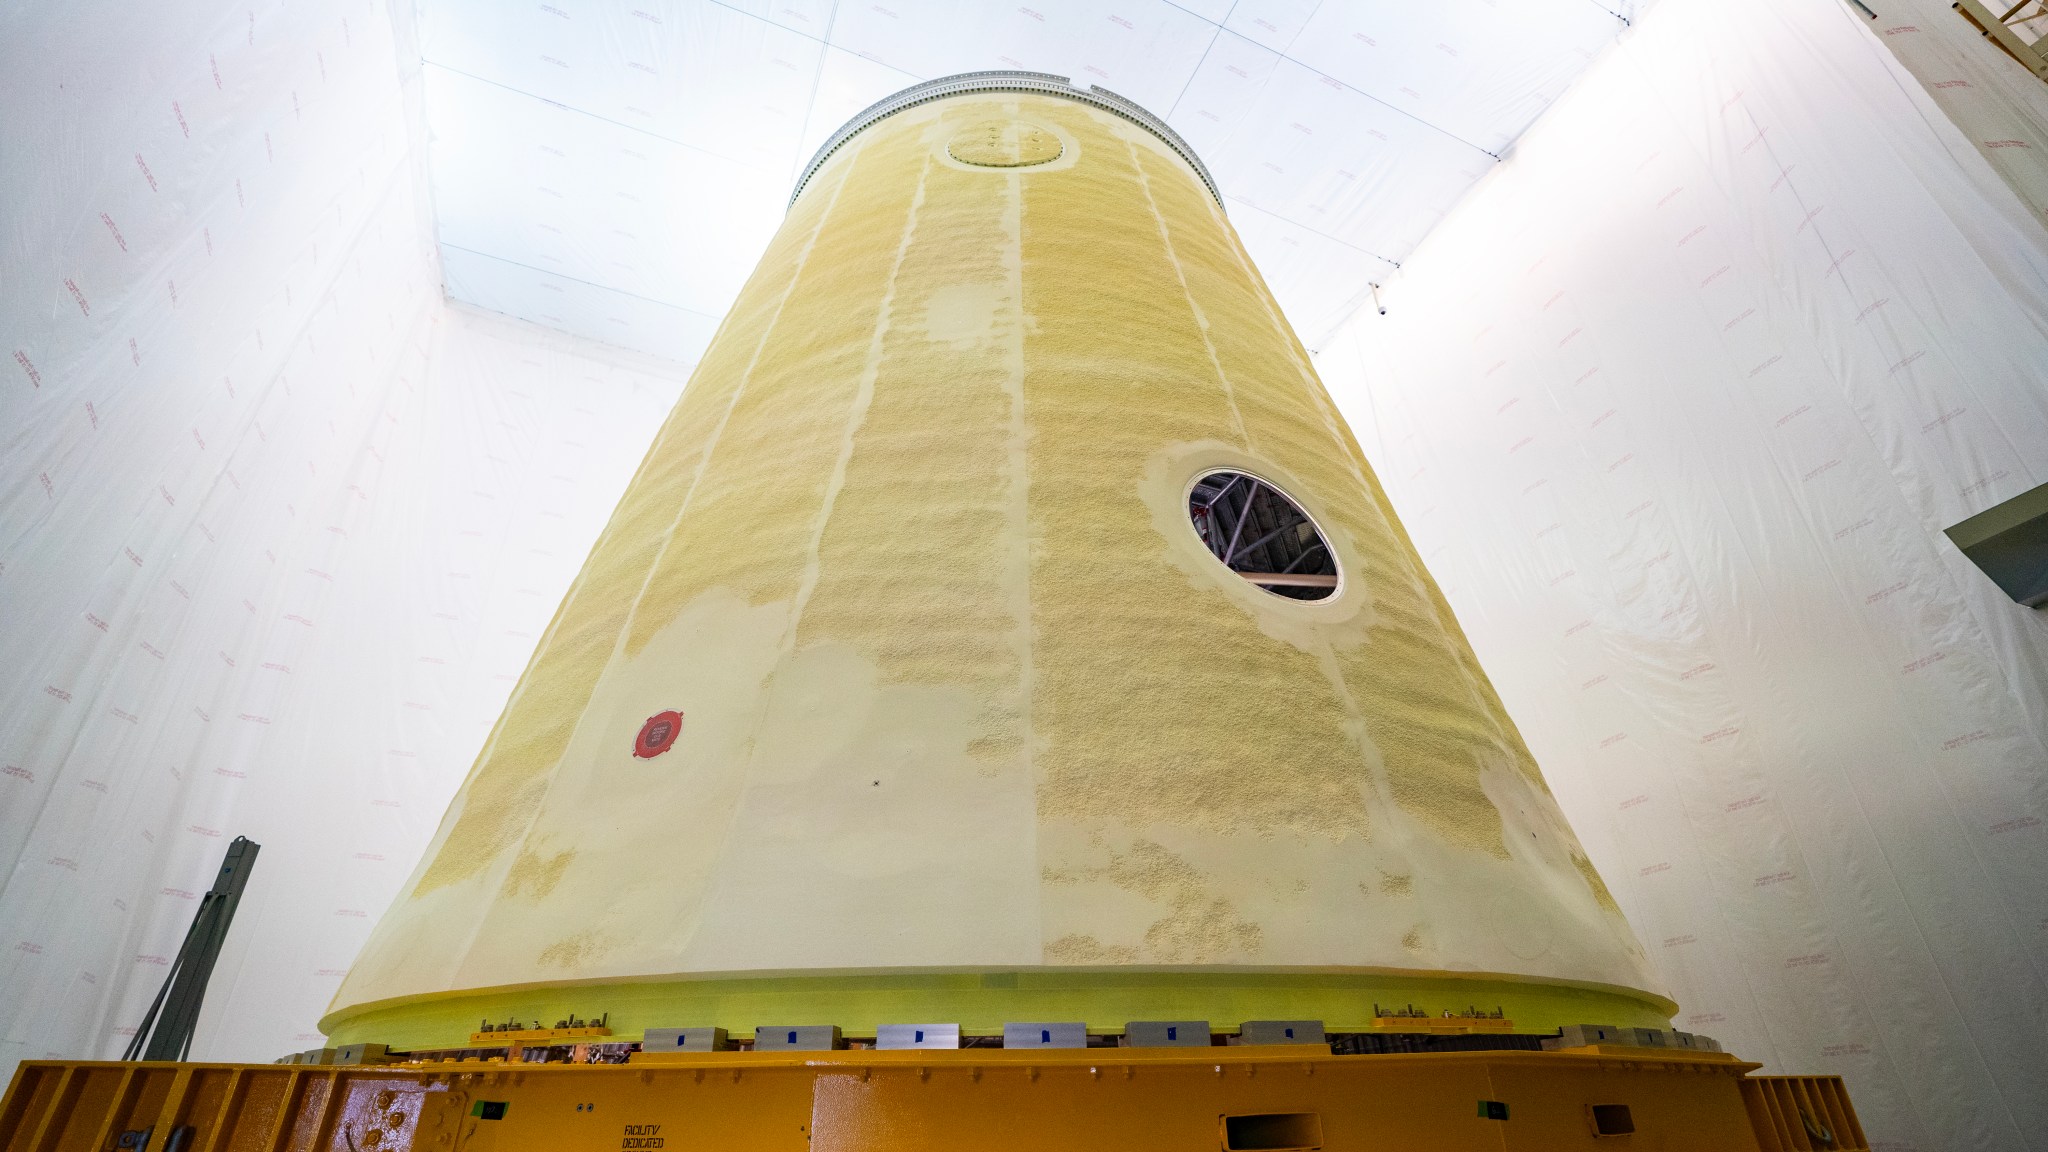 The cone-shaped launch vehicle stage adapter, seen in yellow, is in a production area.